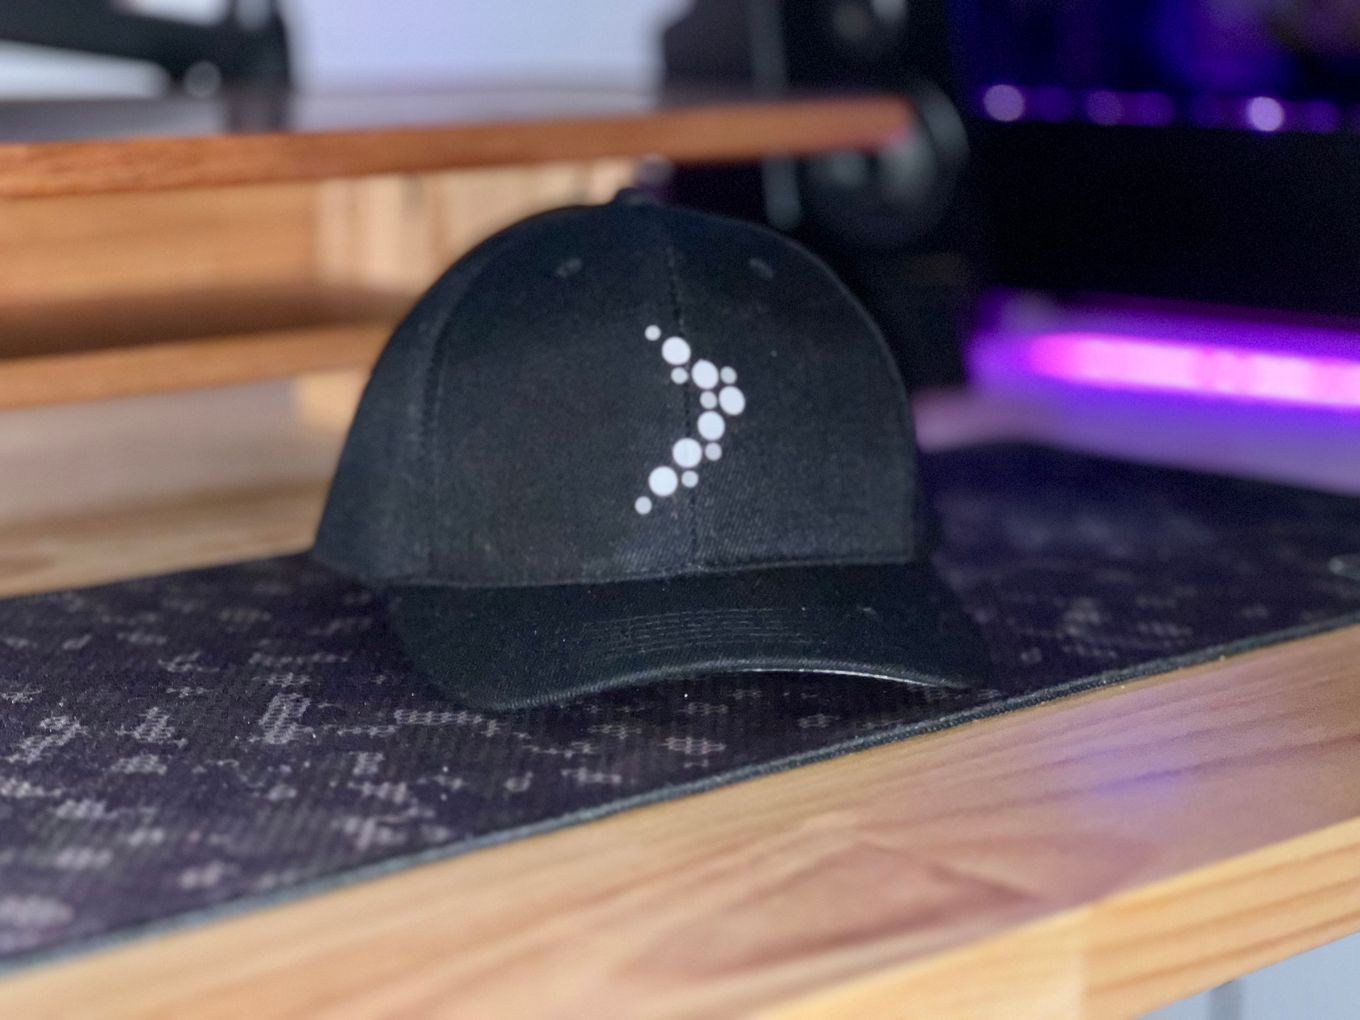 A black hat with InternetNZ branding sitting on top of a wooden table.